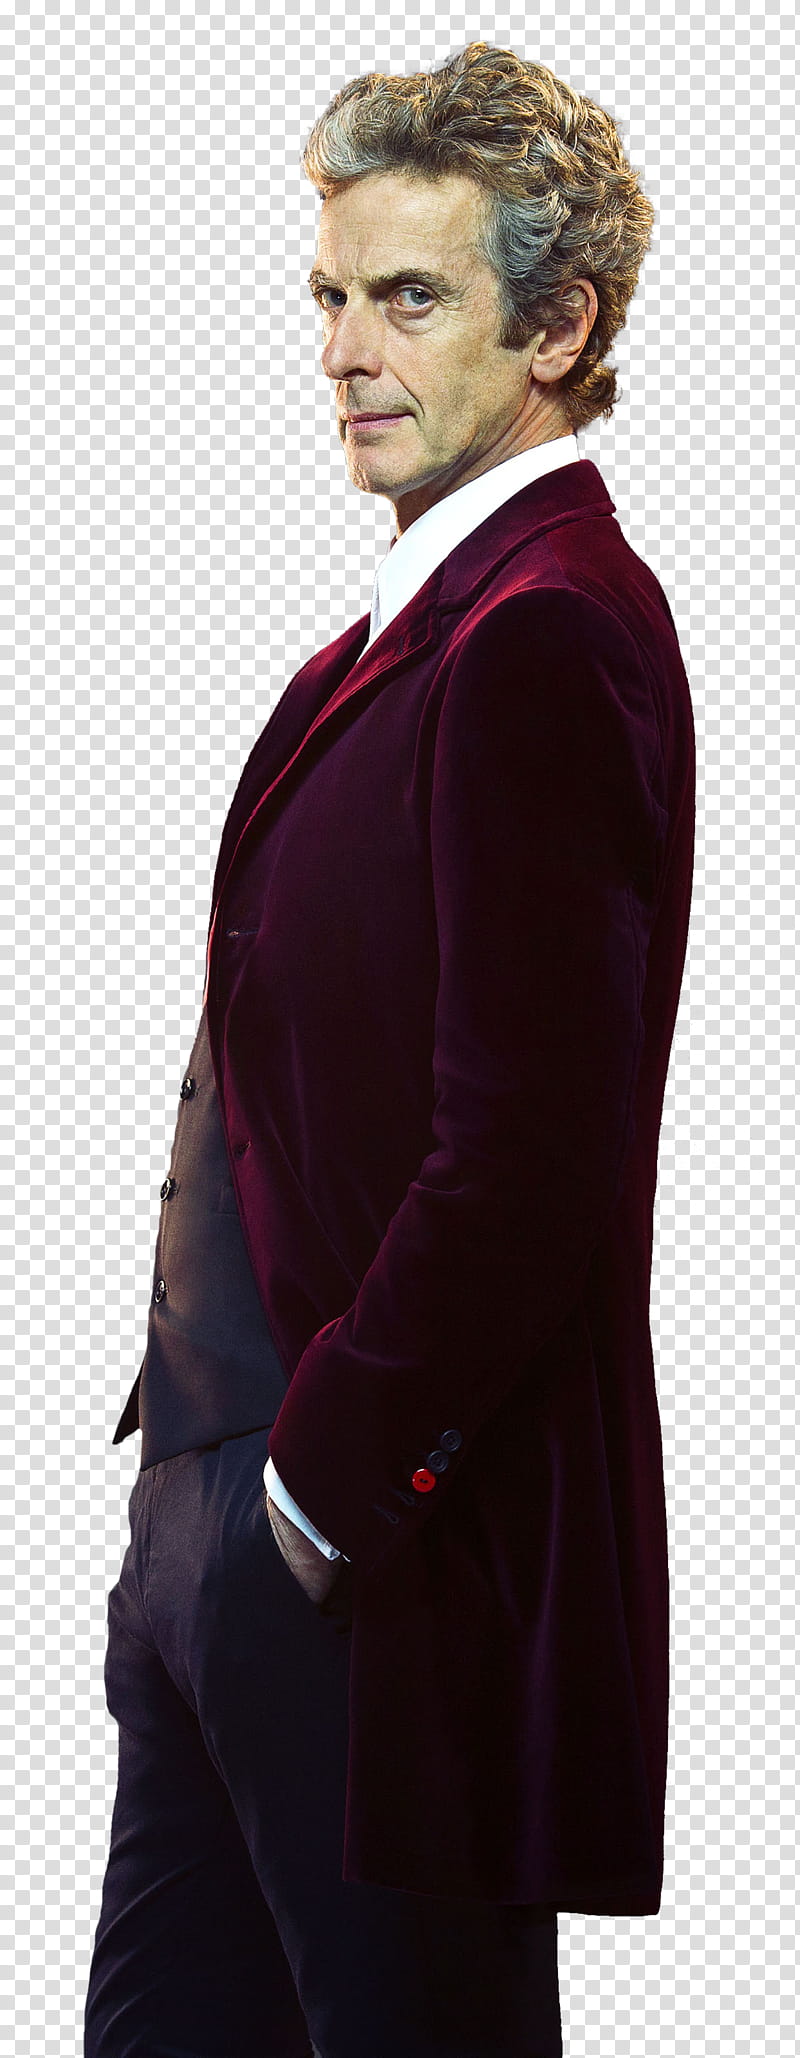 Doctor Who Season , man in maroon blazer putting hands on pocket transparent background PNG clipart